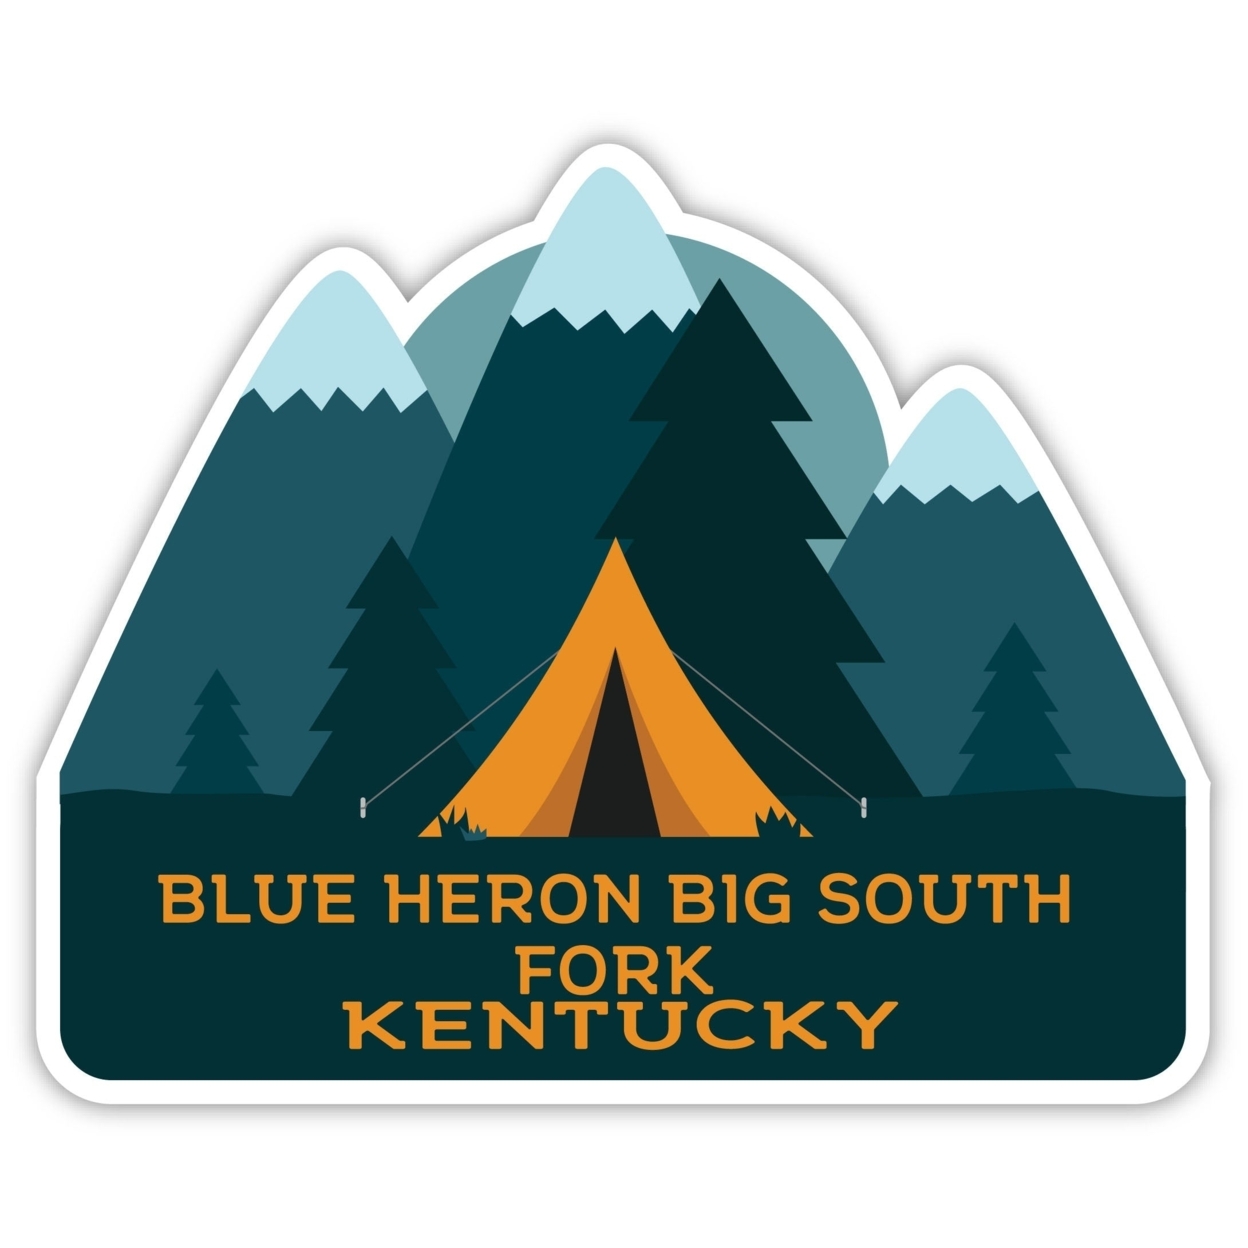 Blue Heron Big South Fork Kentucky Souvenir Decorative Stickers (Choose Theme And Size) - 4-Pack, 4-Inch, Tent